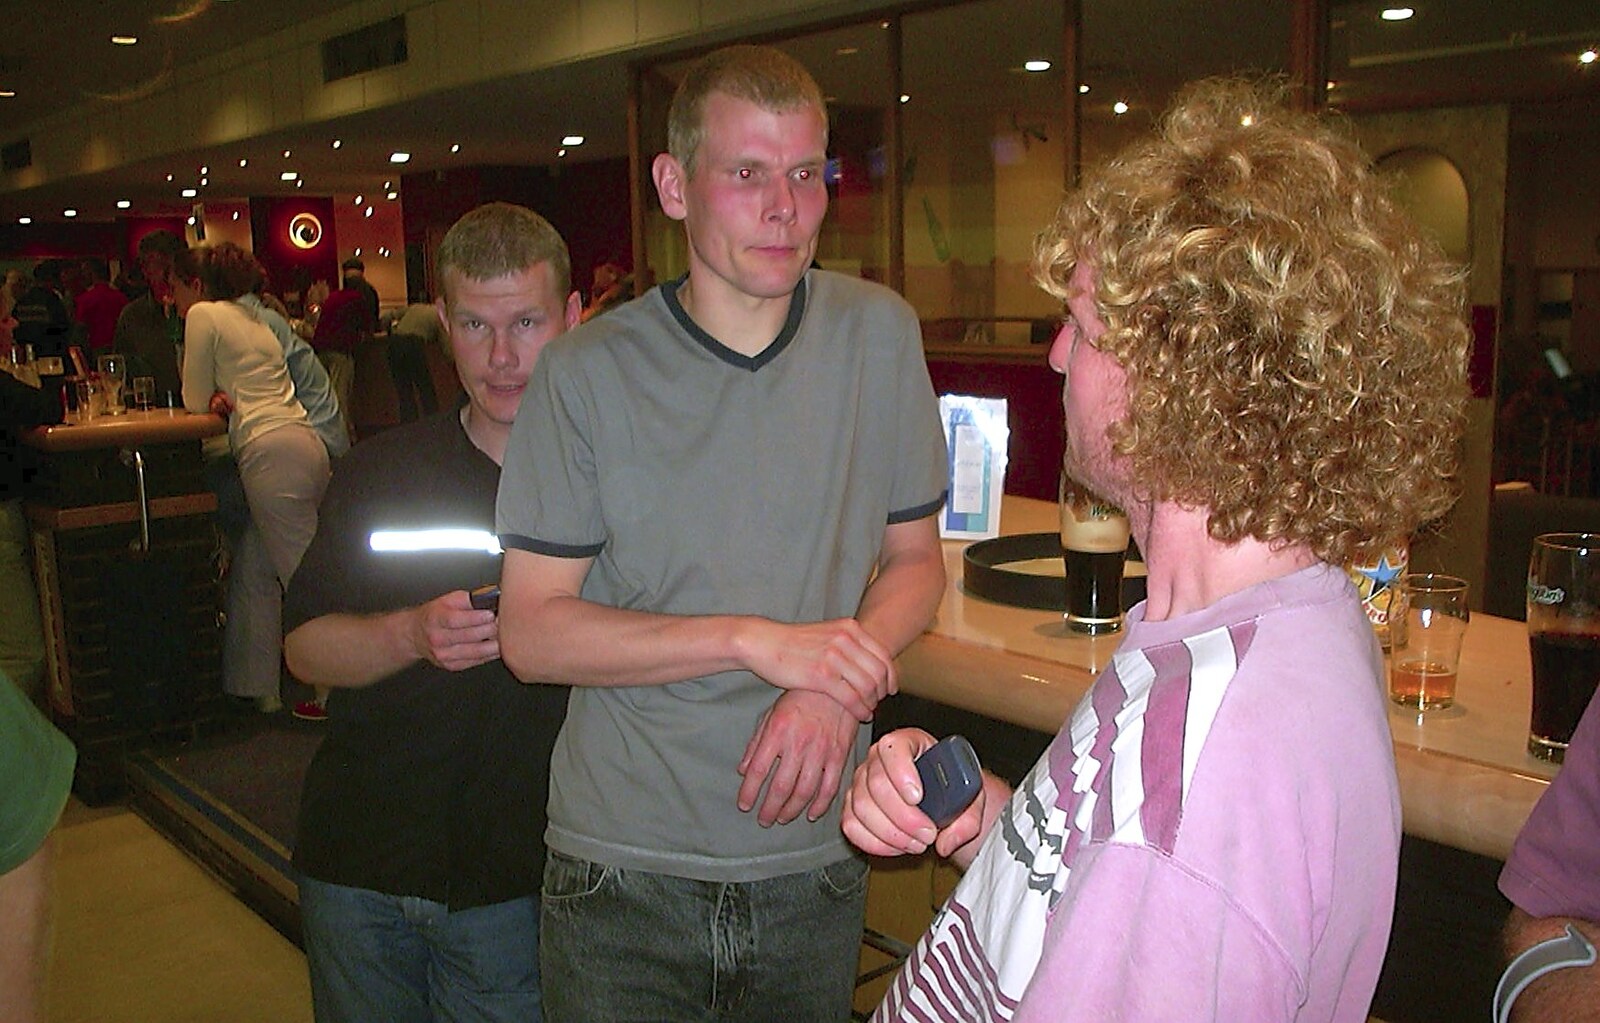 Mikey-P, Bill and Wavy at the bar from Ten Pin Bowling, Norwich, Norfolk - 13th September 2003